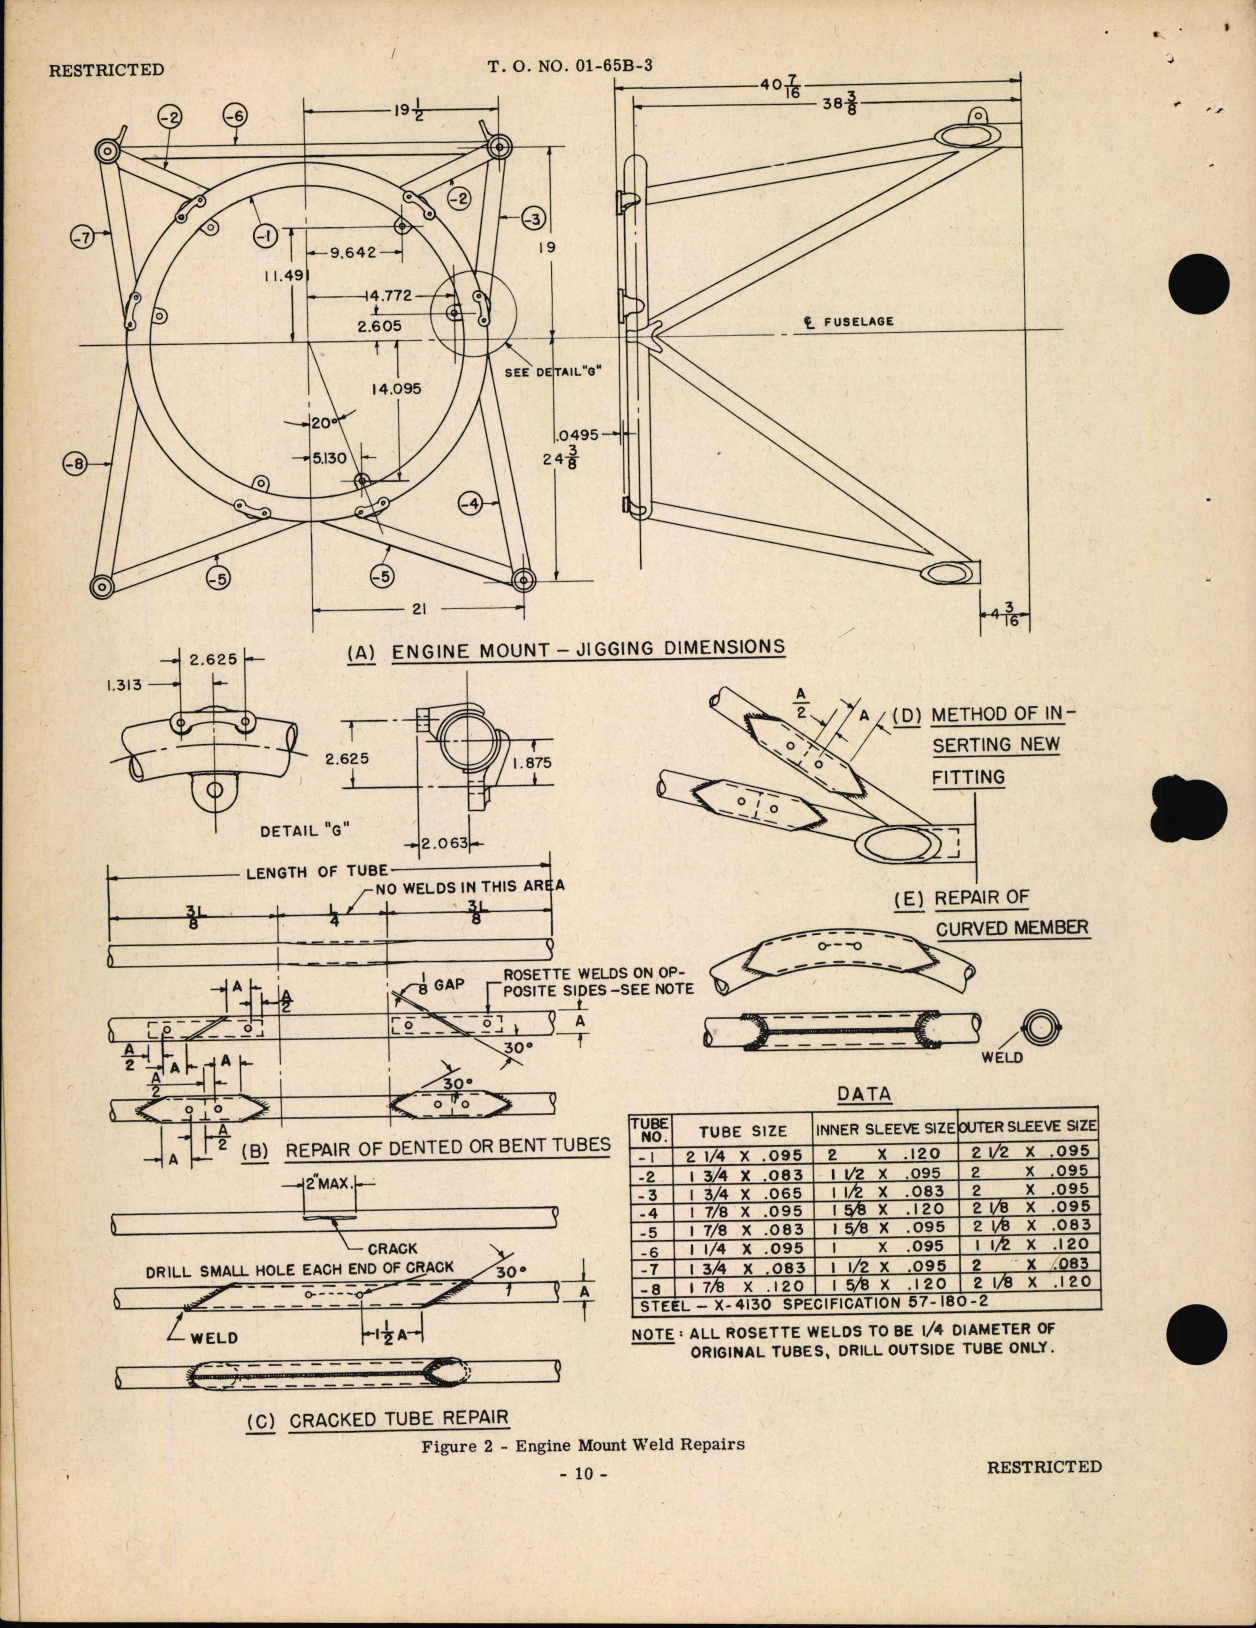 Sample page 13 from AirCorps Library document: Structural Repair Instructions for Army Model P-47 Series